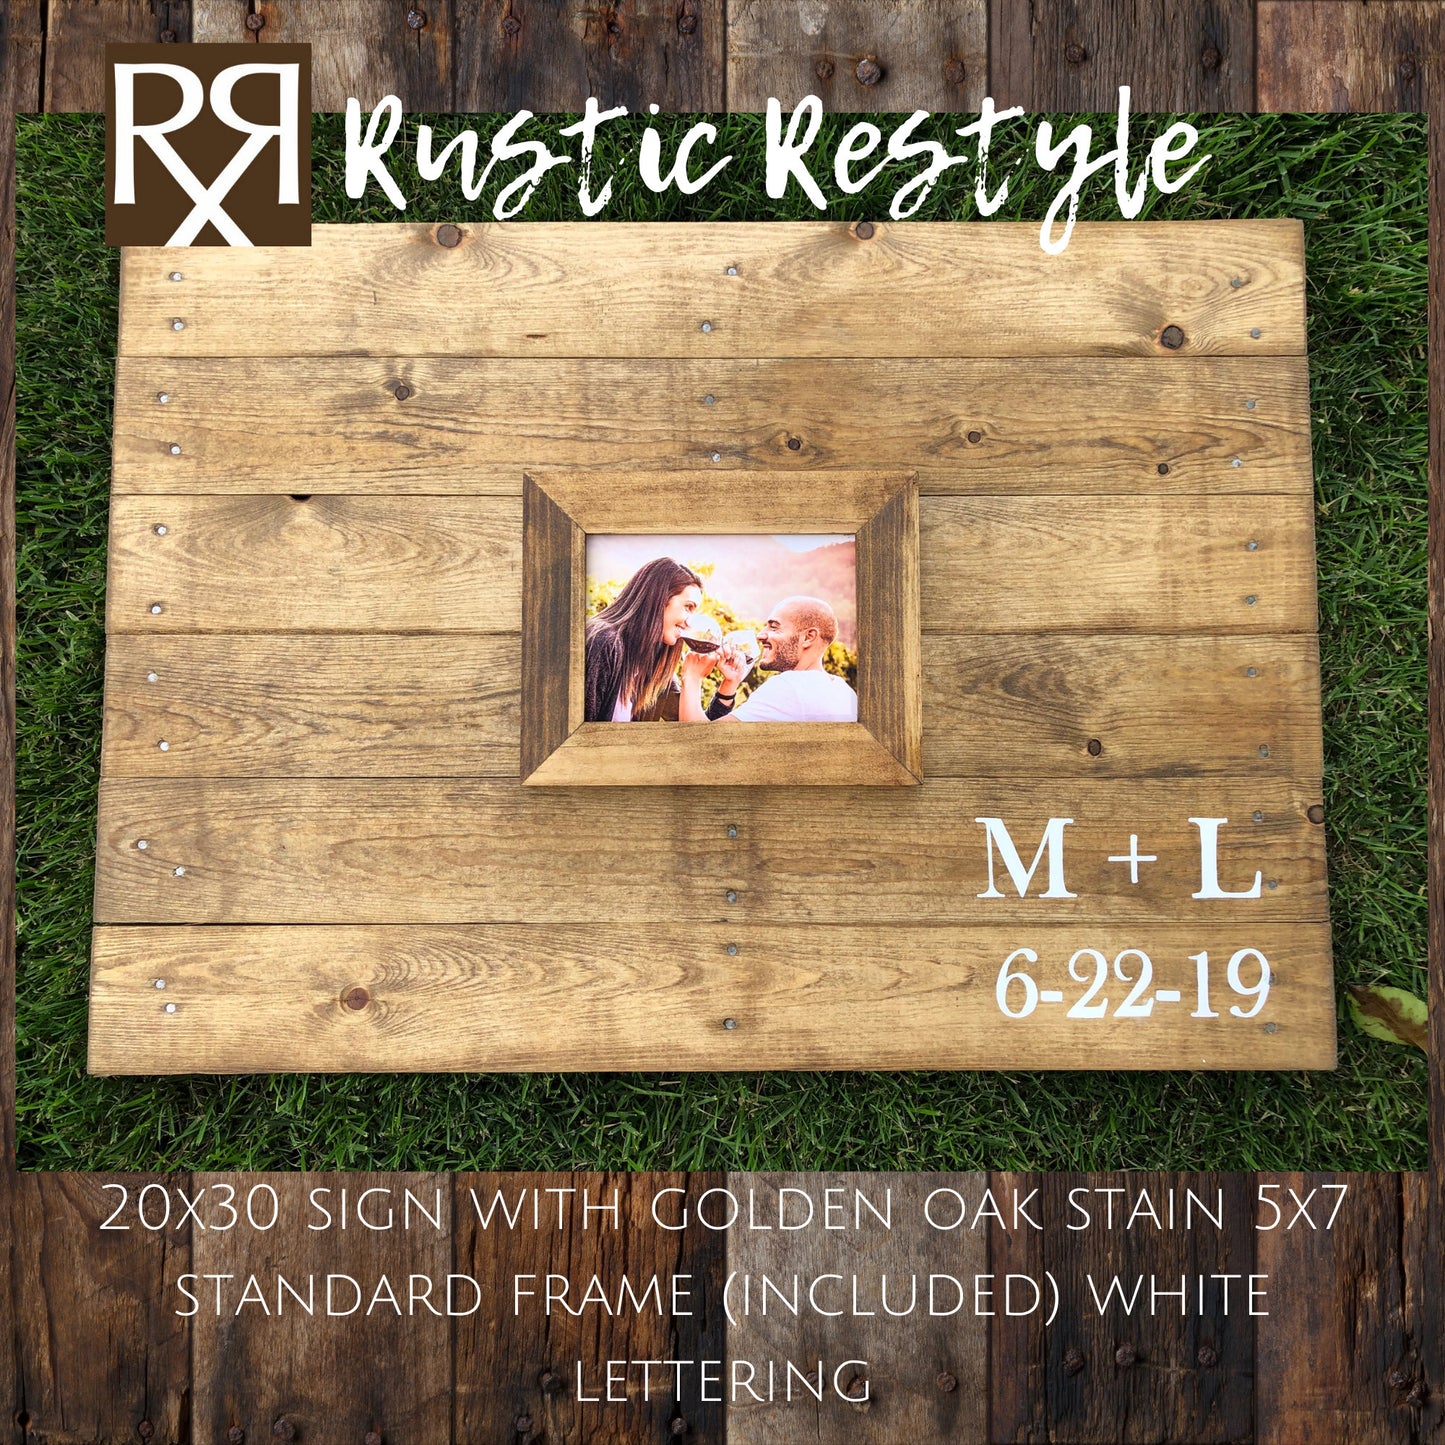 Guest book frame, Photo Guestbook sign, Wedding initials sign, rustic wedding decor, Custom wedding gift, wood sign wedding, pallet wall art - Rustic Restyle